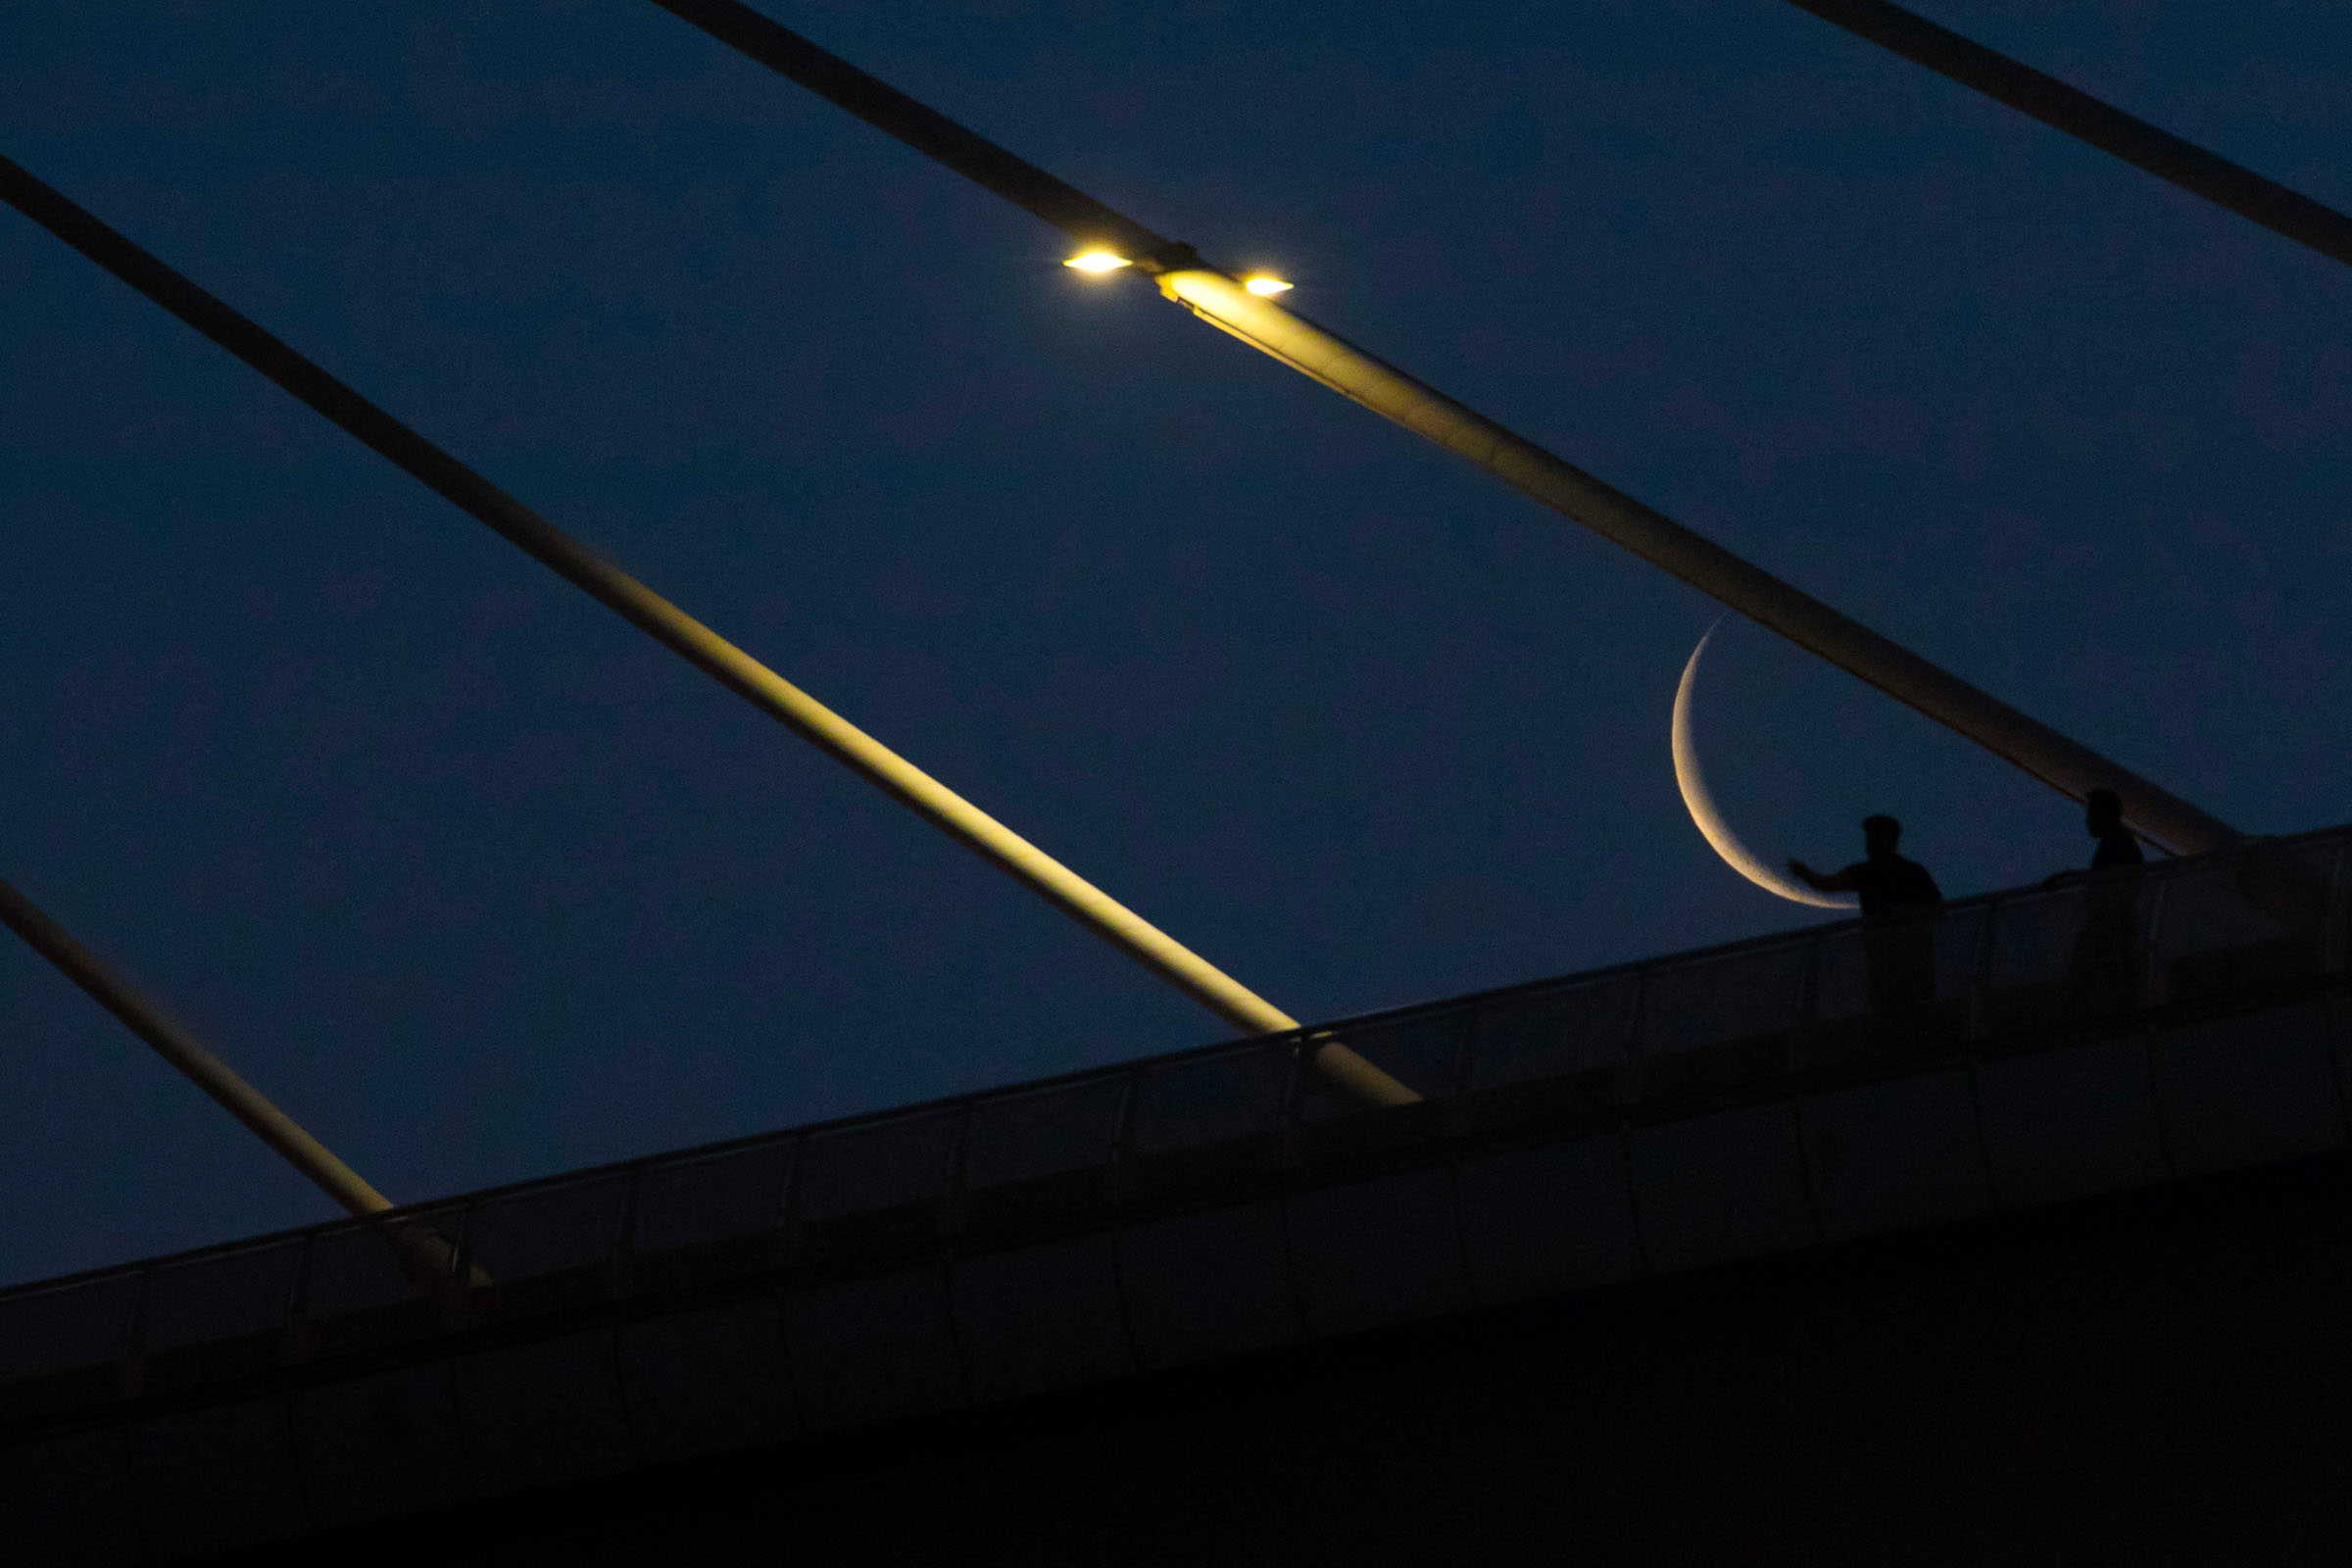 The waning crescent moon, near the end of the Muslim holy month of Ramadan, is pictured behind the Mohammad Baqir al-Sadr bridge in Iraq's southern city of Basra early on April 28, 2022. (Photo by Hussein Faleh / AFP)